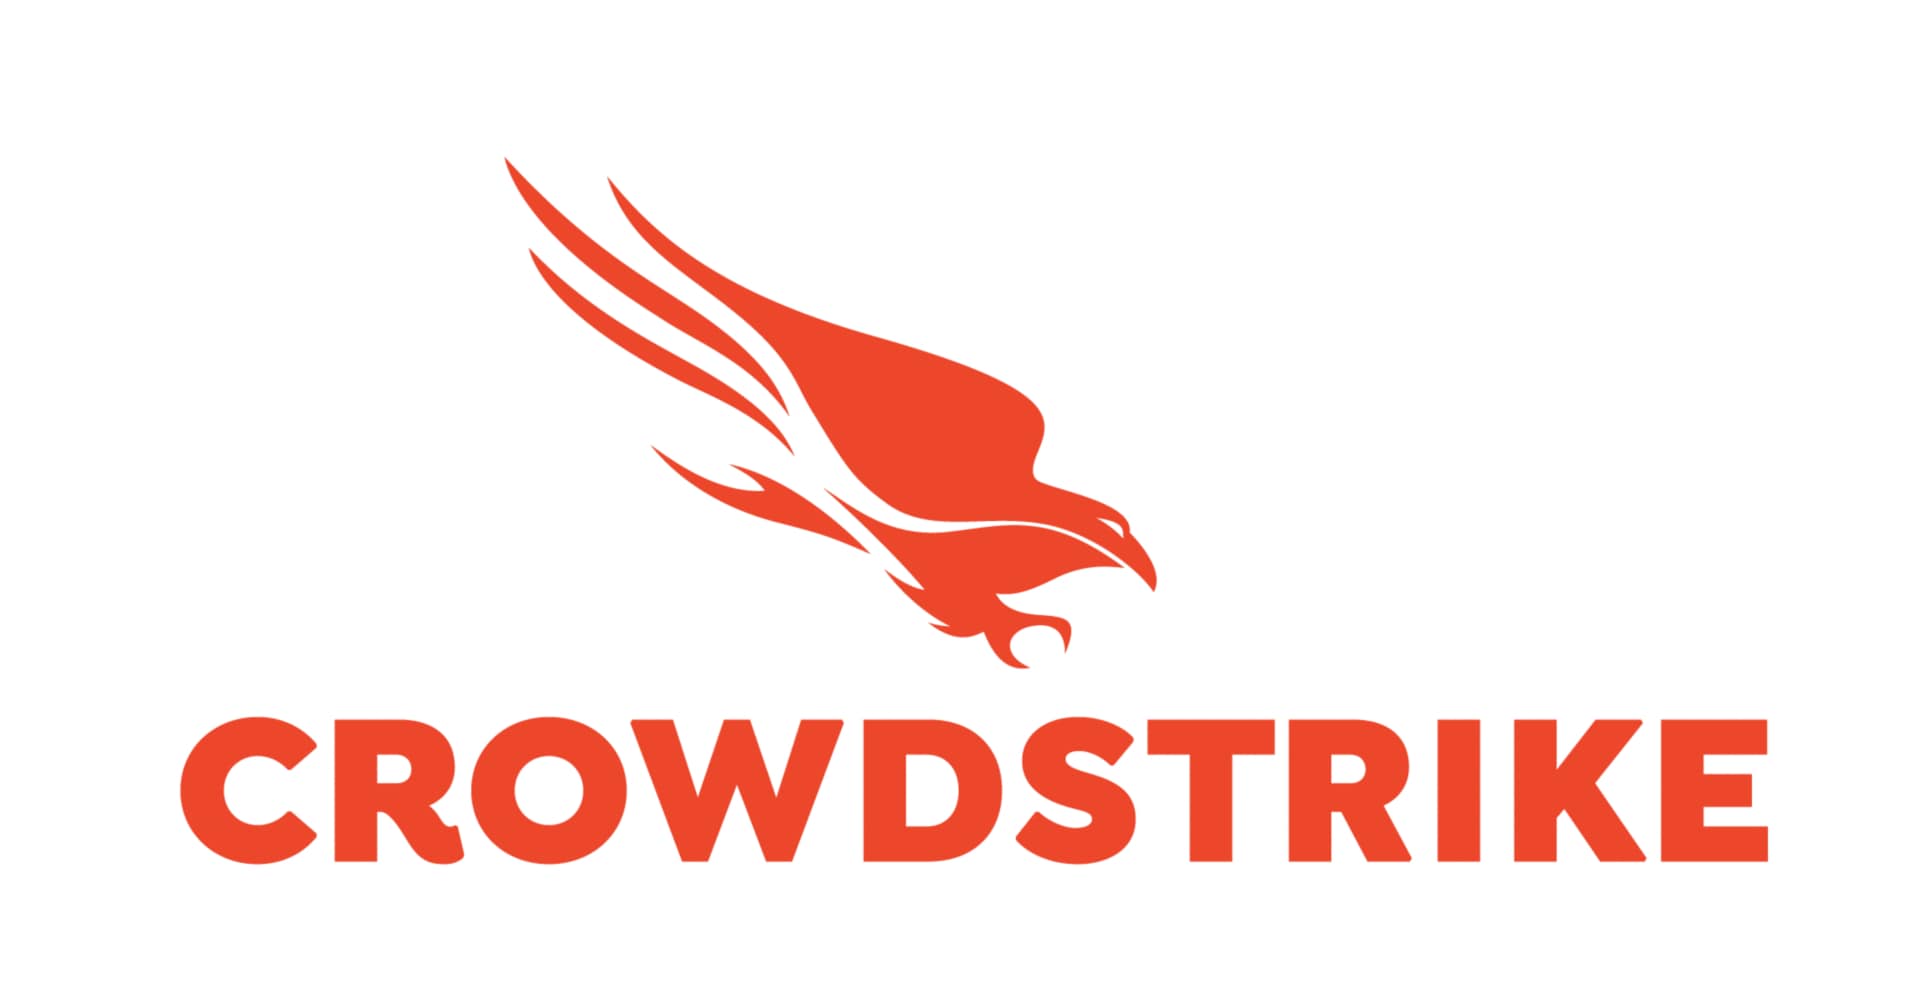 CrowdStrike 22-Month Intelligence Actor Profiles and Indicators of Compromise (IOC) Feed